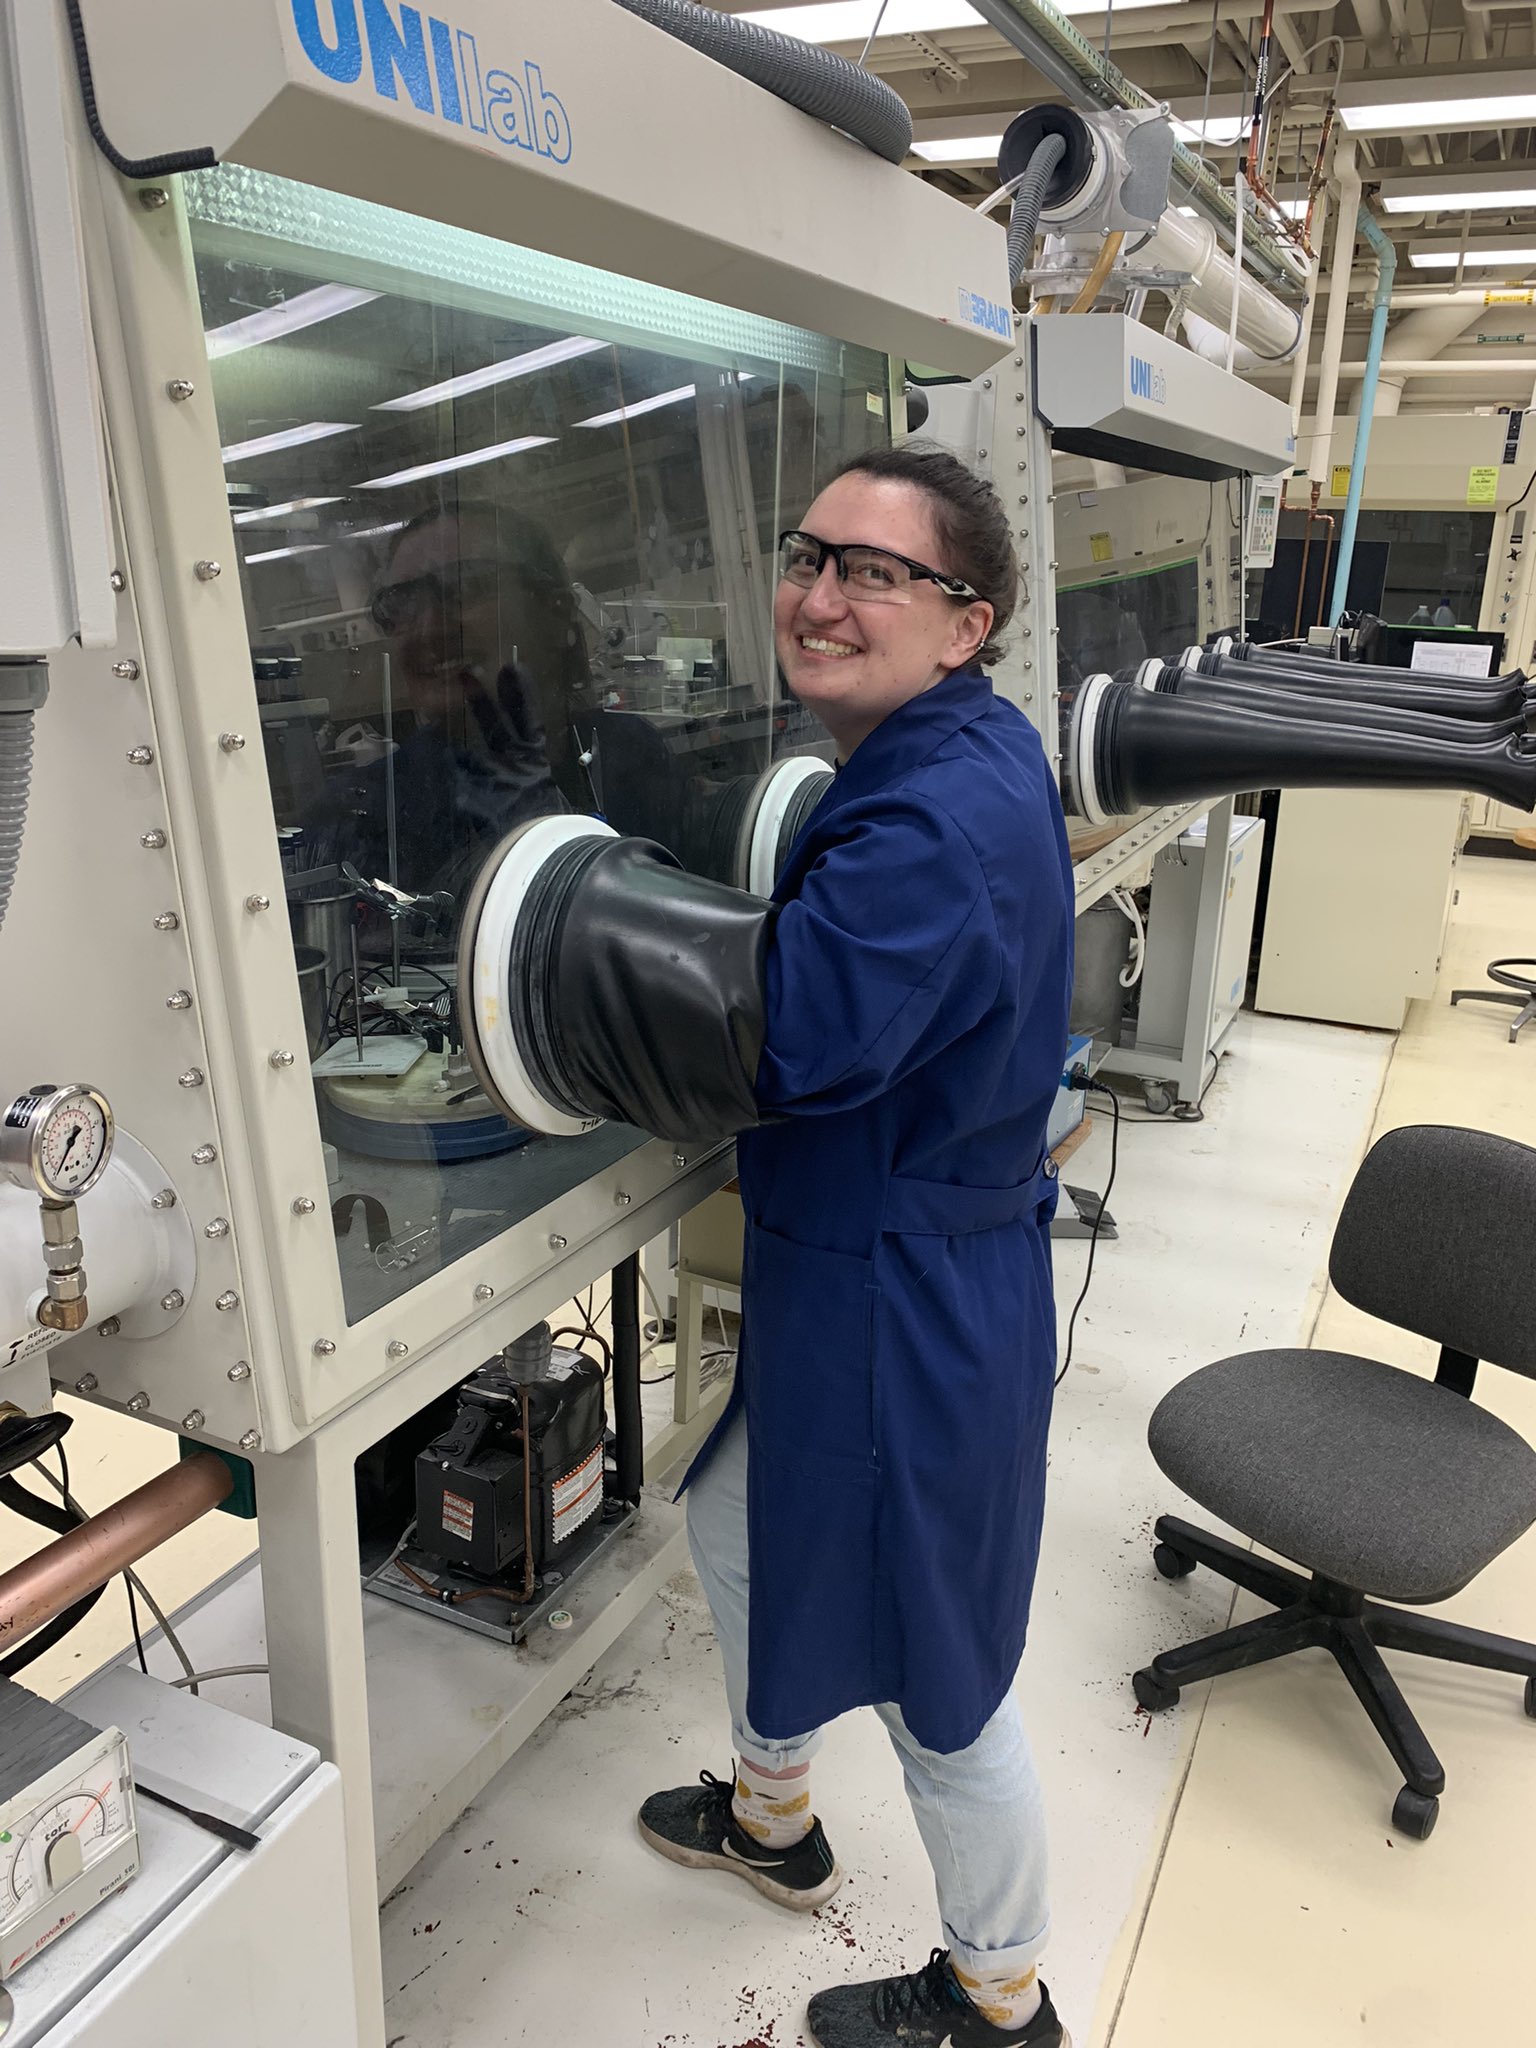 Becca Segel smiling in a laboratory wearing a dark blue lab coat and safety glasses.